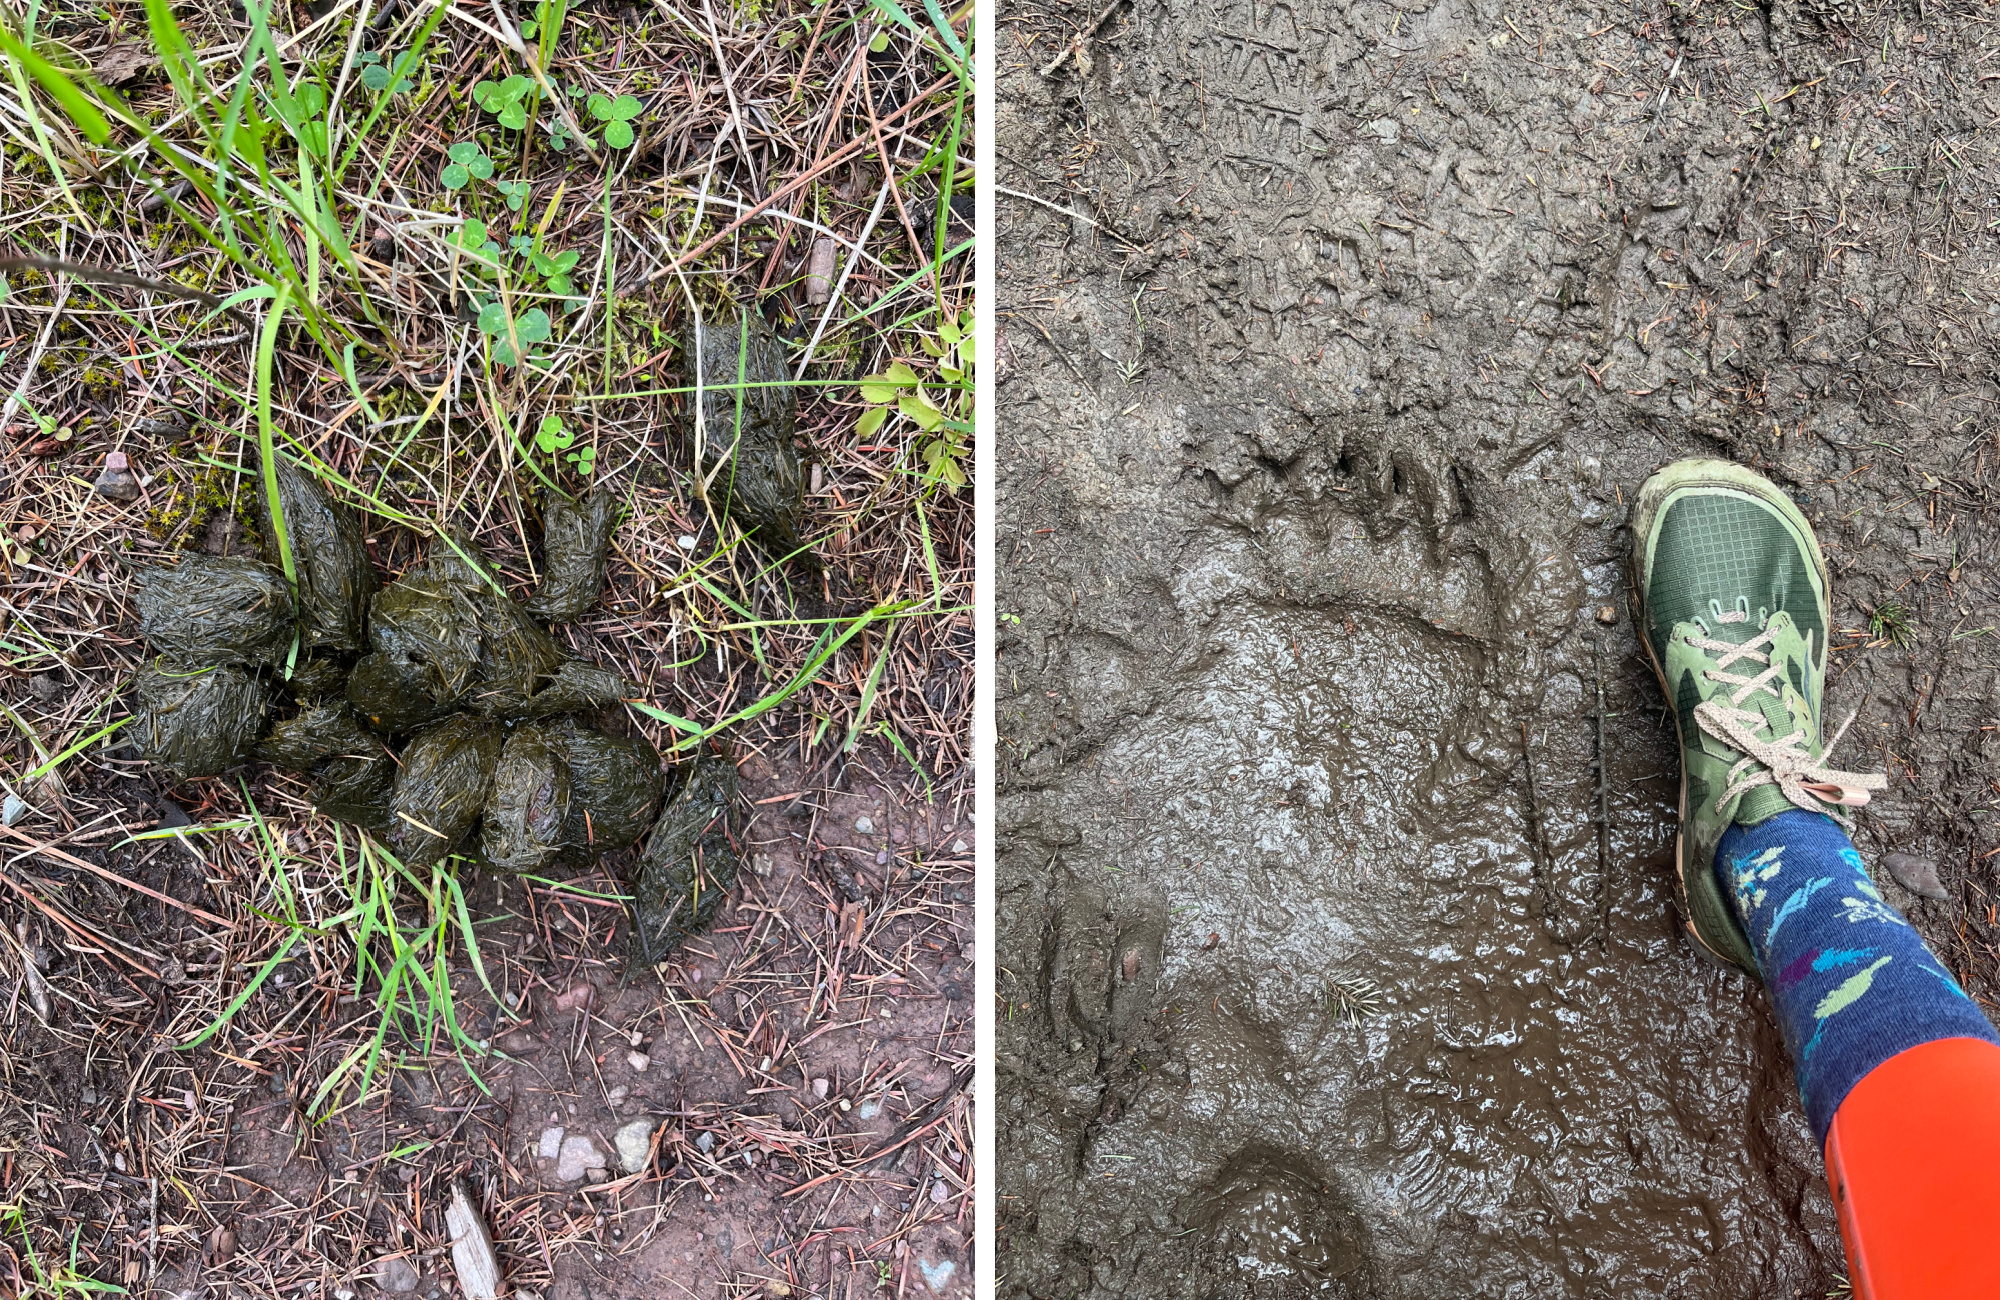 bear scat with track